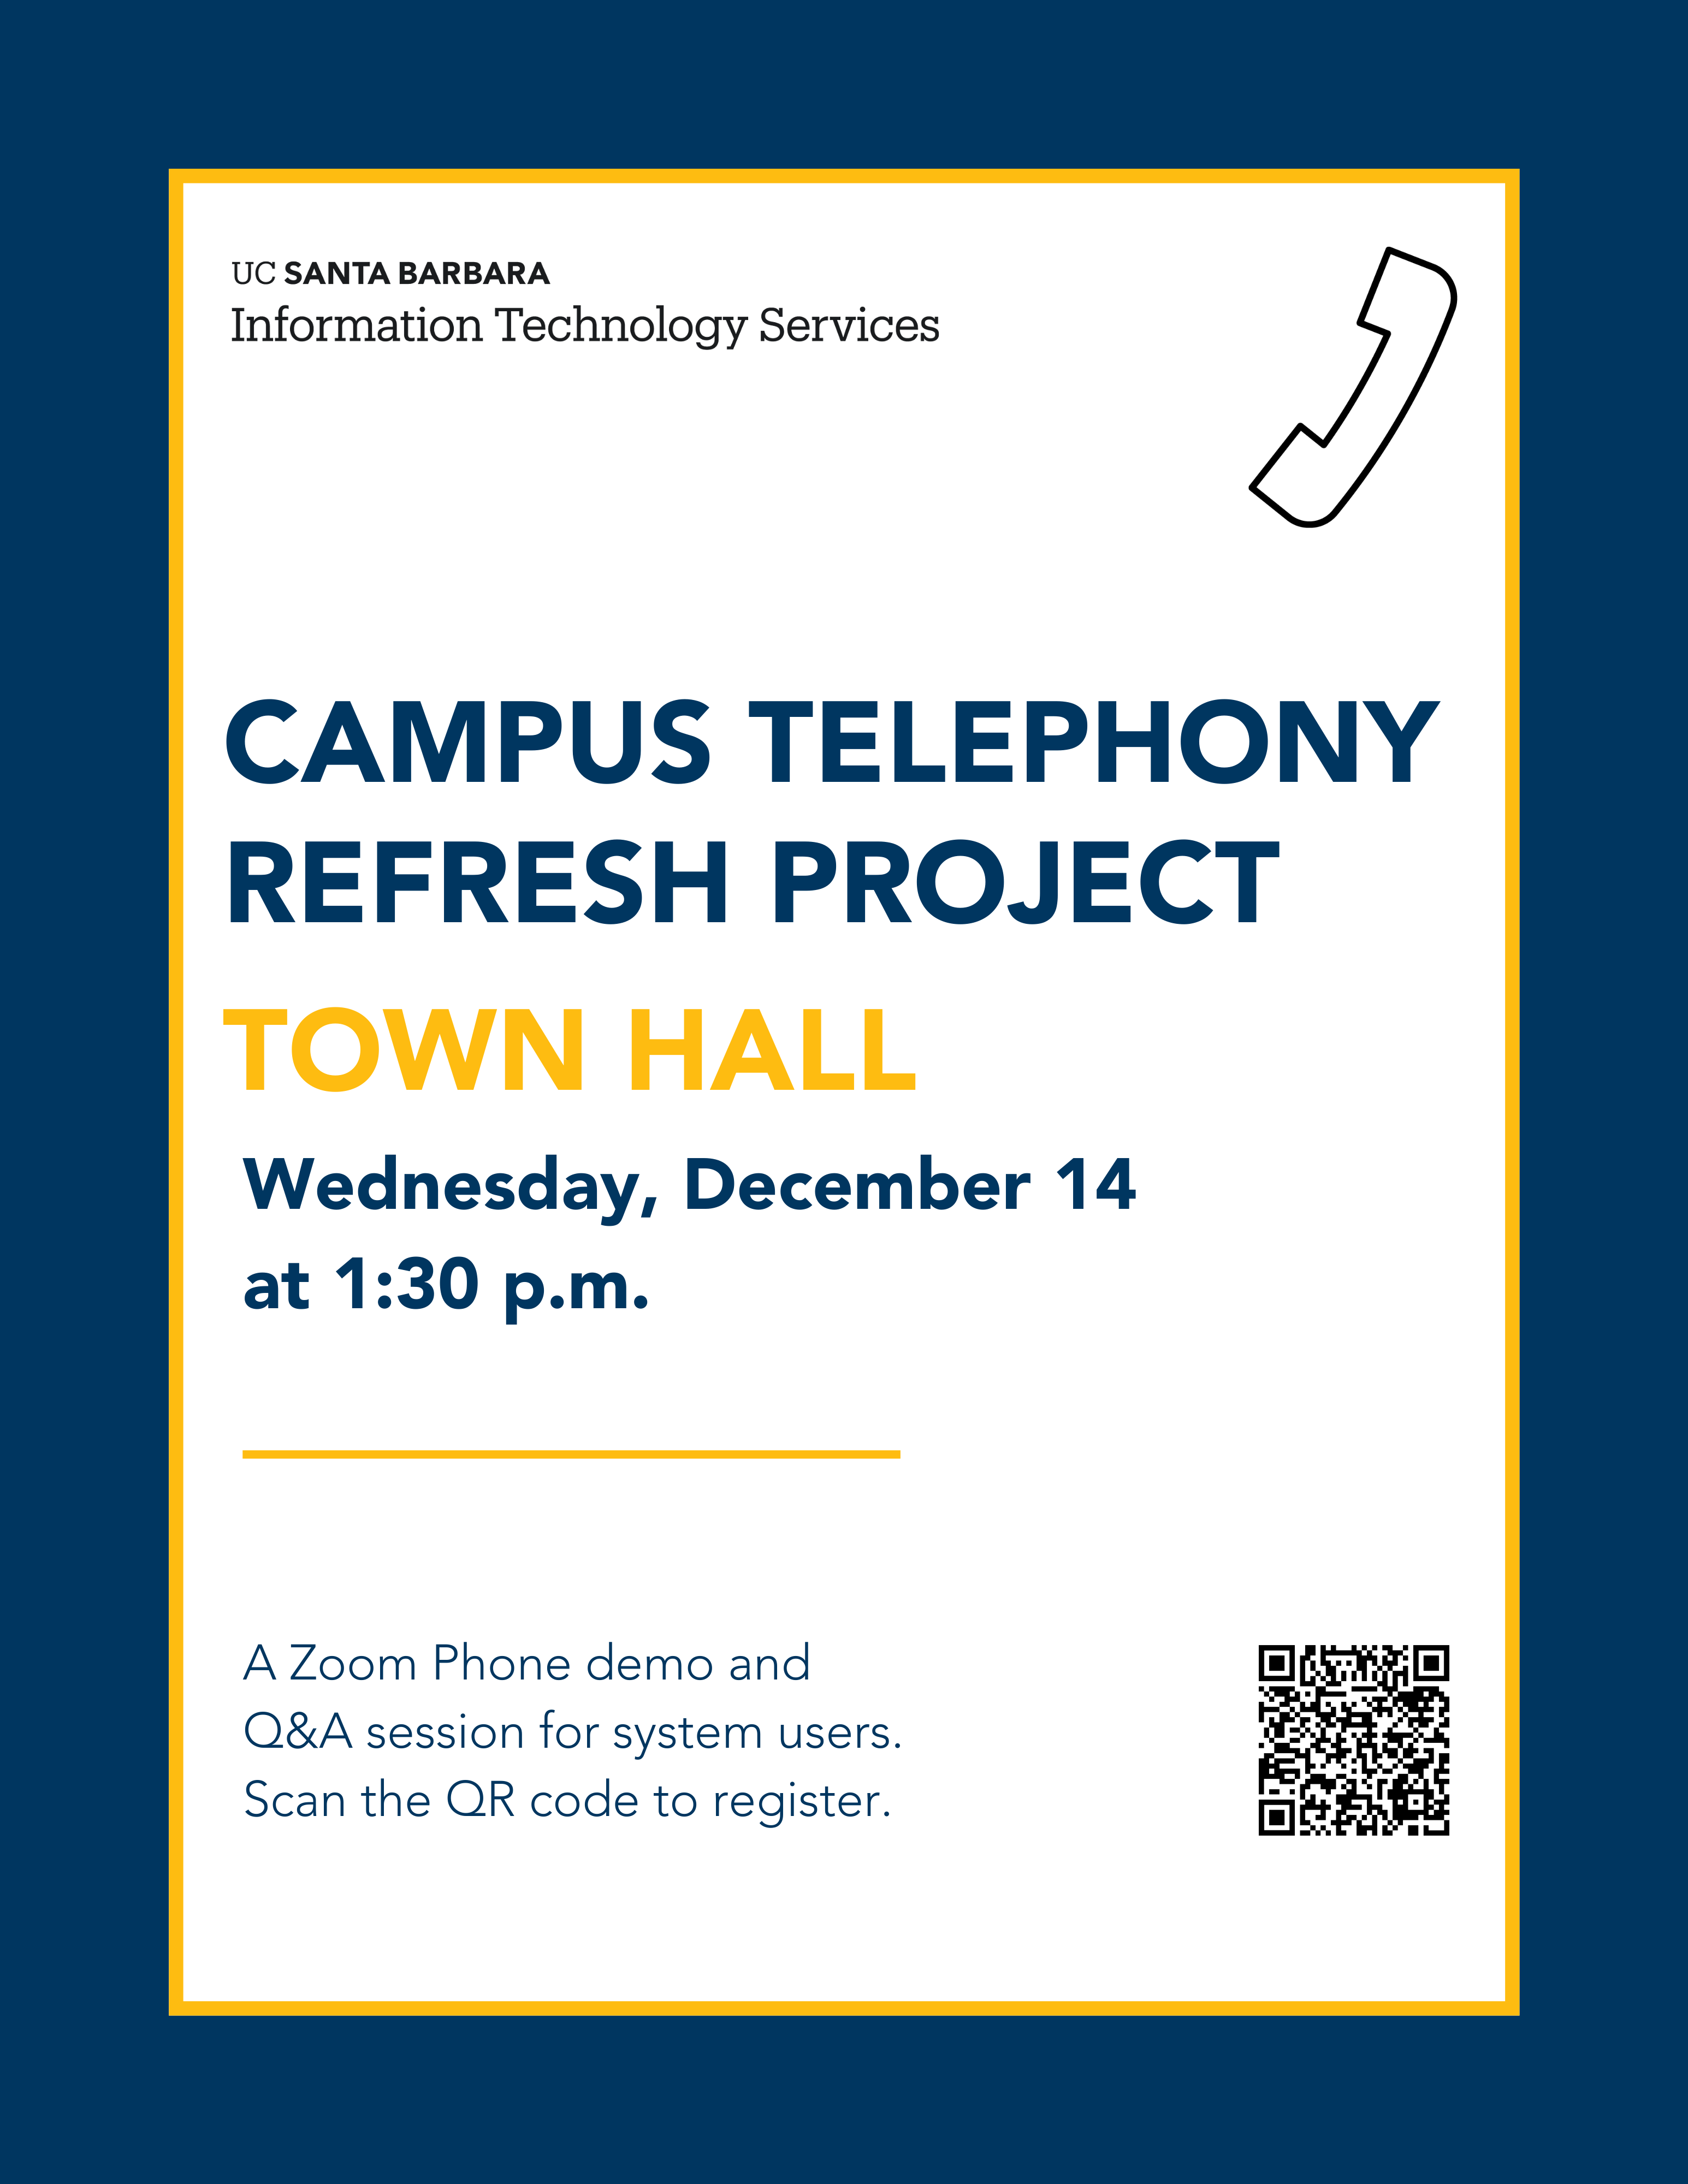 Campus Telephony Townhall Flyer